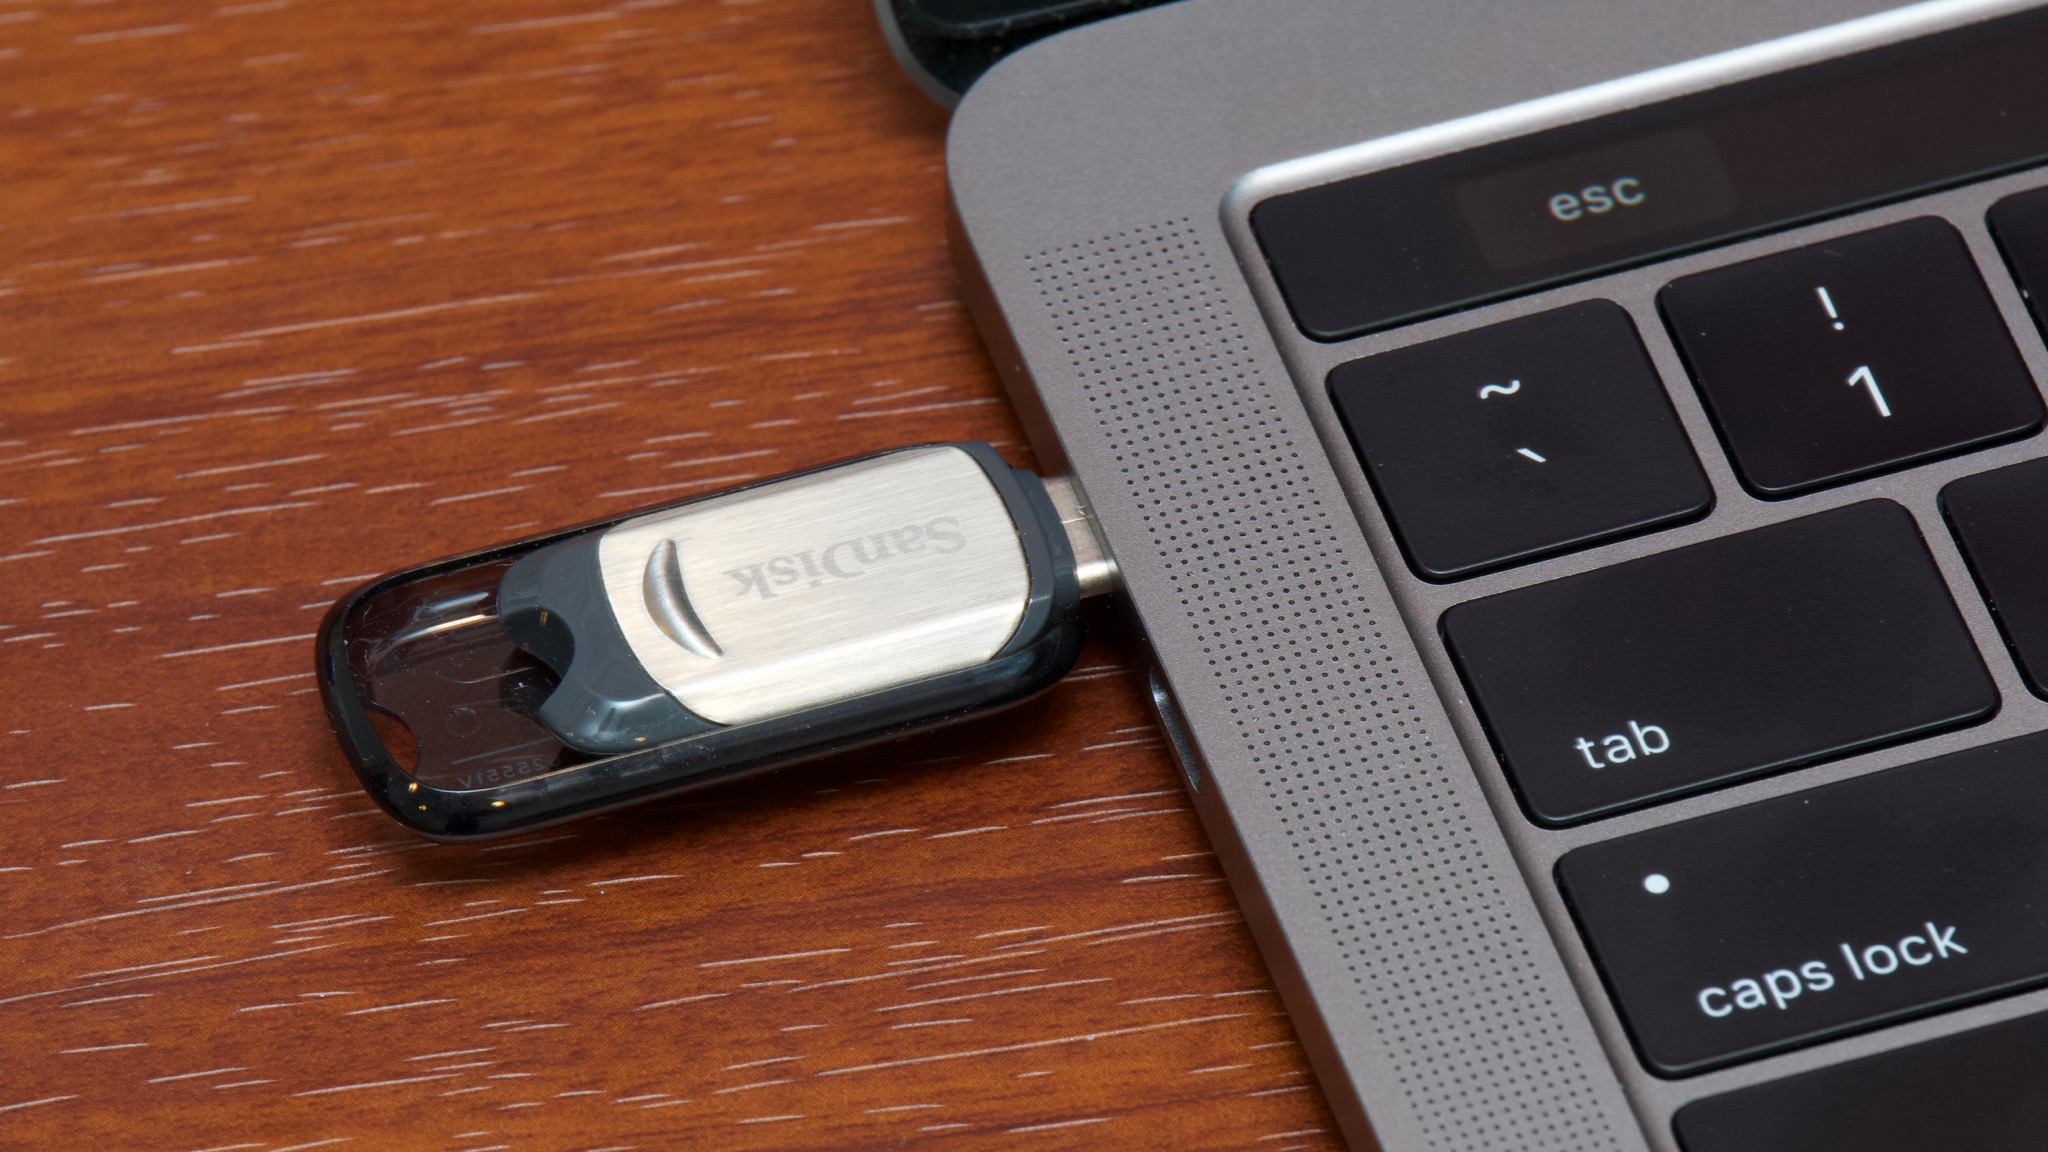 making bootable usb for mac